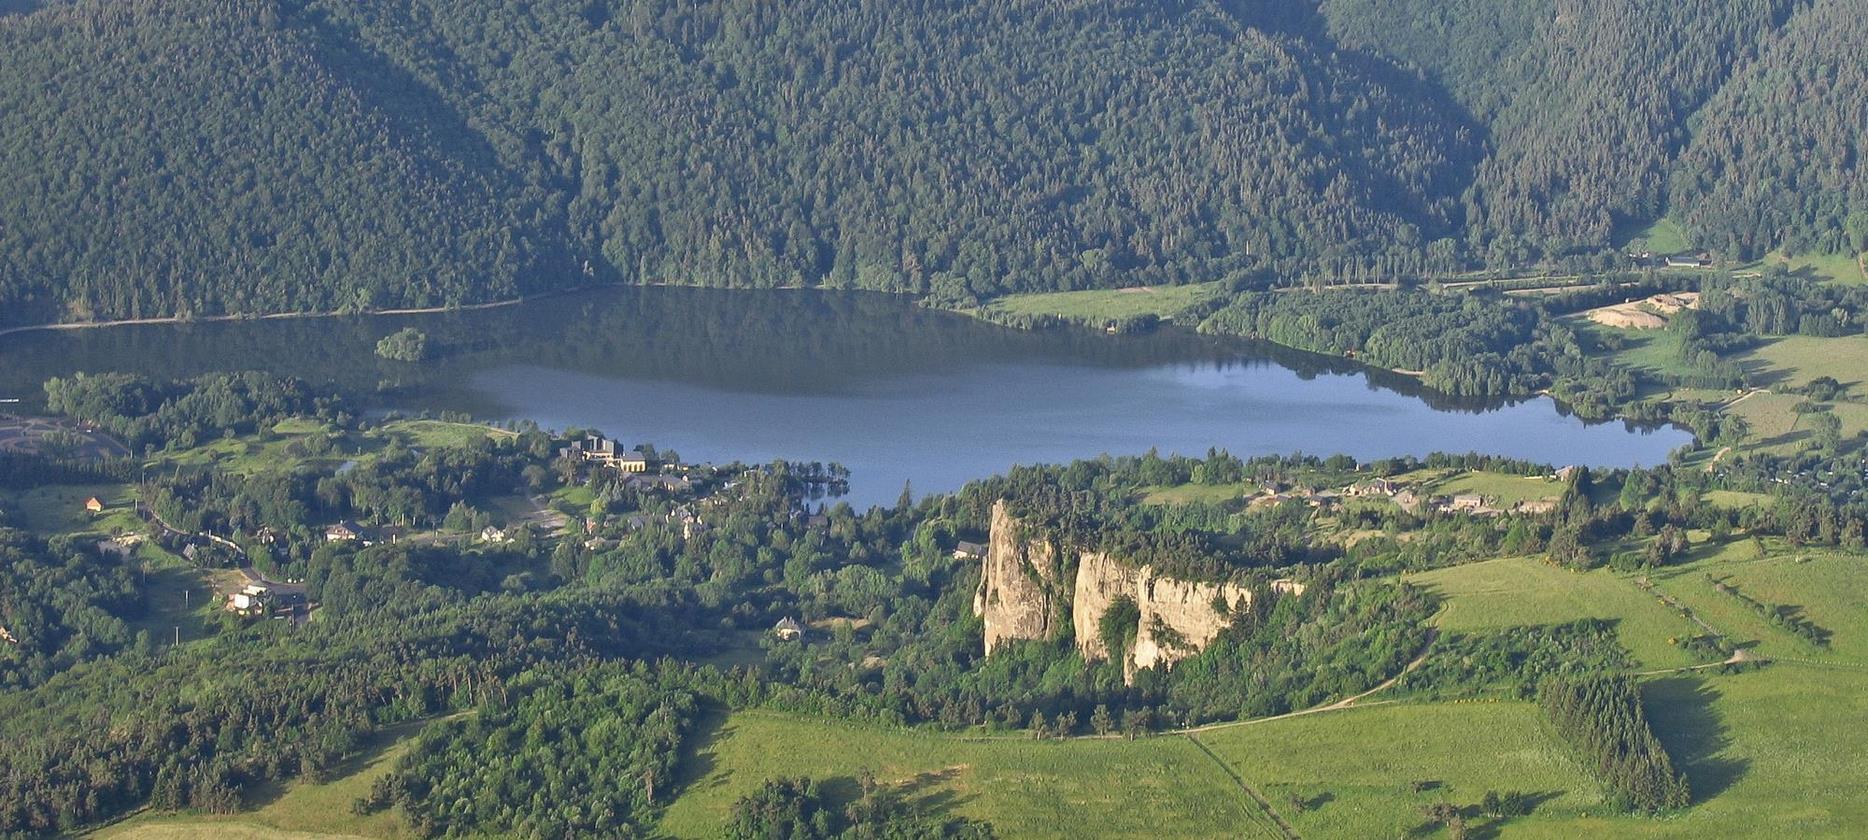 Super Besse - aerial view of Lac Chambon